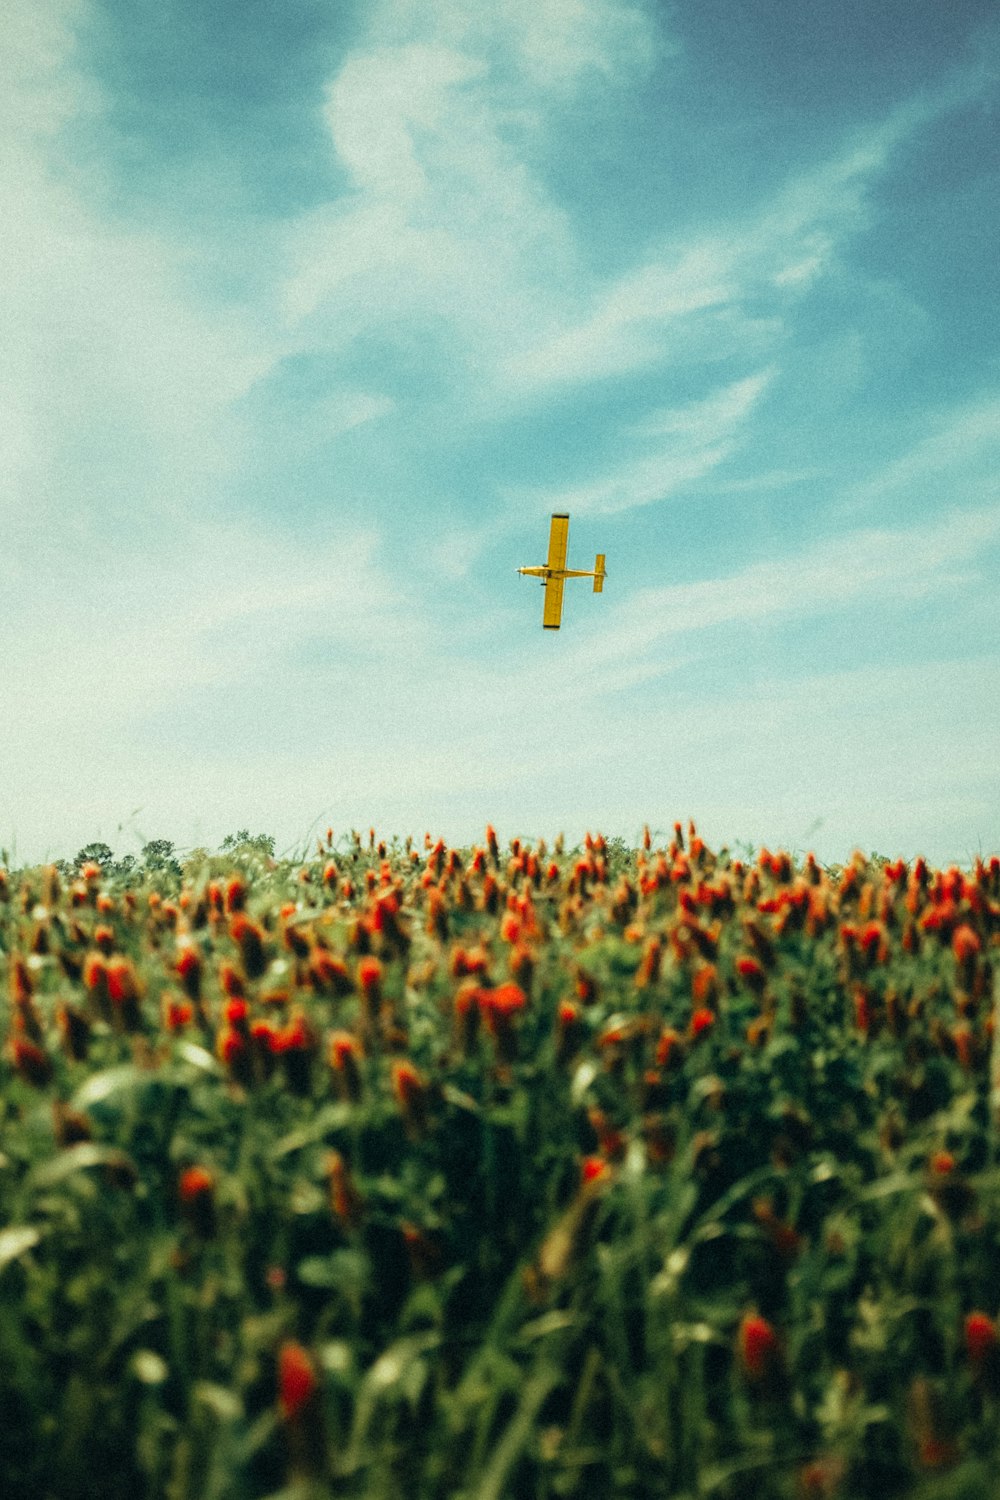 an airplane flying over a field of flowers